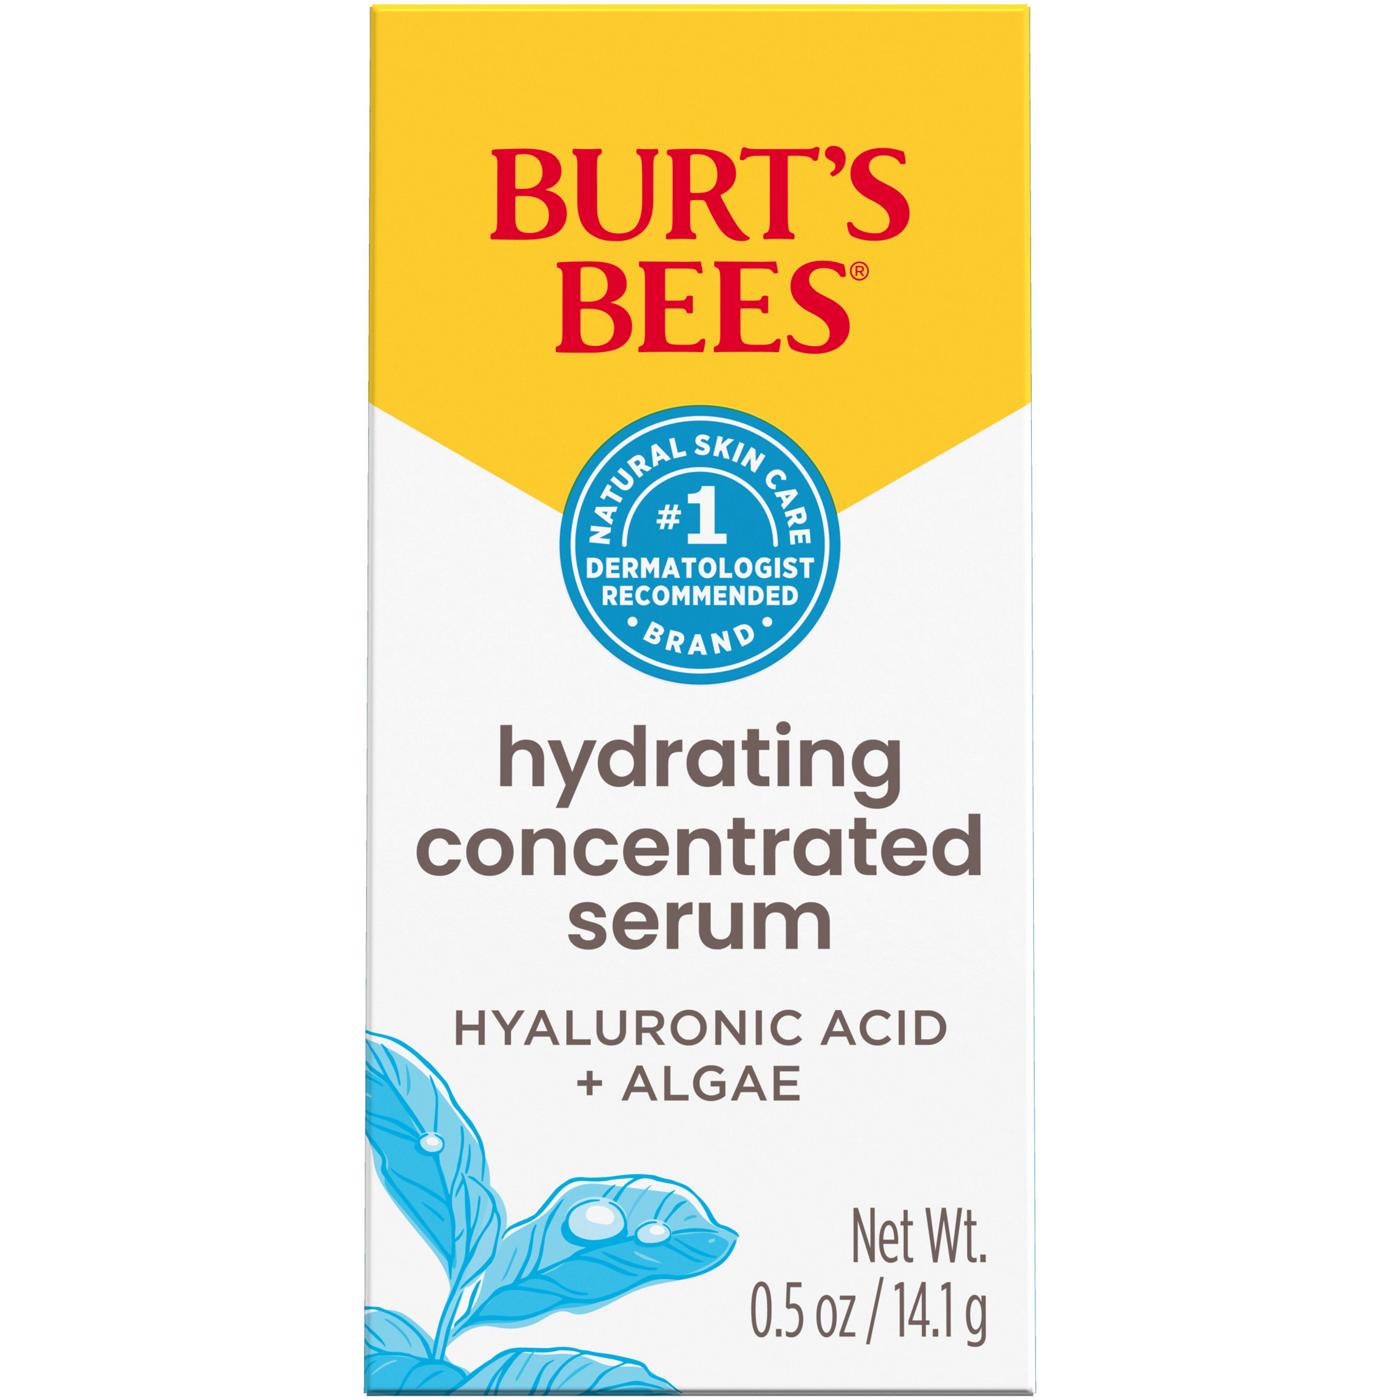 Burt's Bees Concentrated Hydrating Facial Serum - Hyaluronic Acid + Algae; image 1 of 7